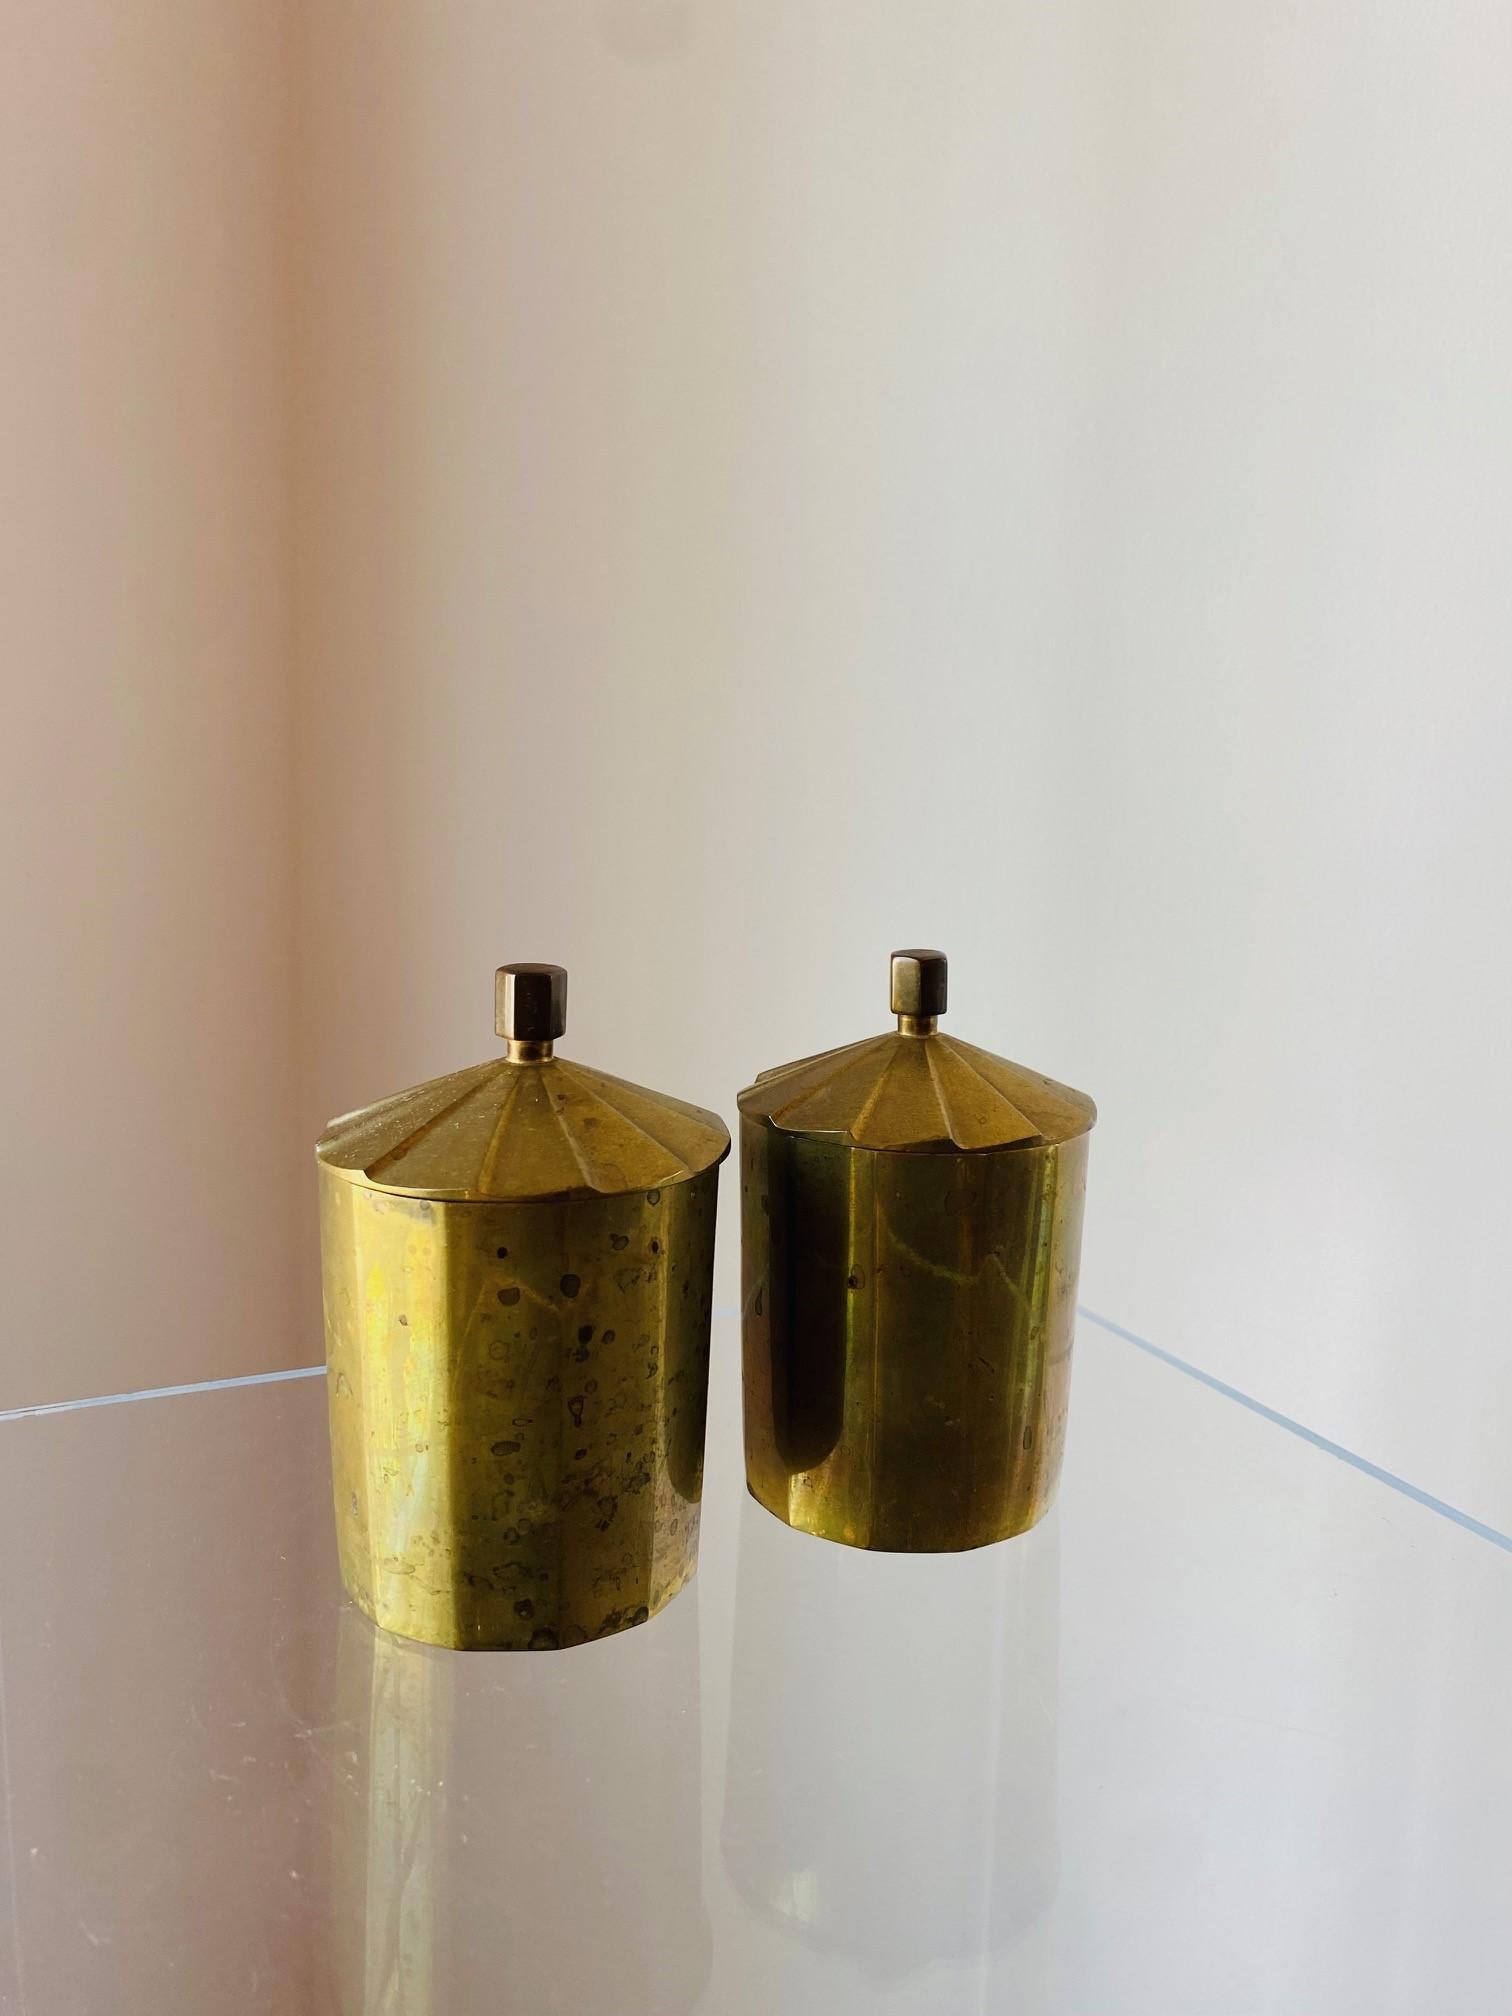 Incredibly rich and substantial pair of brass canisters.  Each of these canisters is beautifully crafted.  The patinated surface adds to their rich and substantial style.  Ideal pieces that will add bohemian glamour to your decor.  Each simple